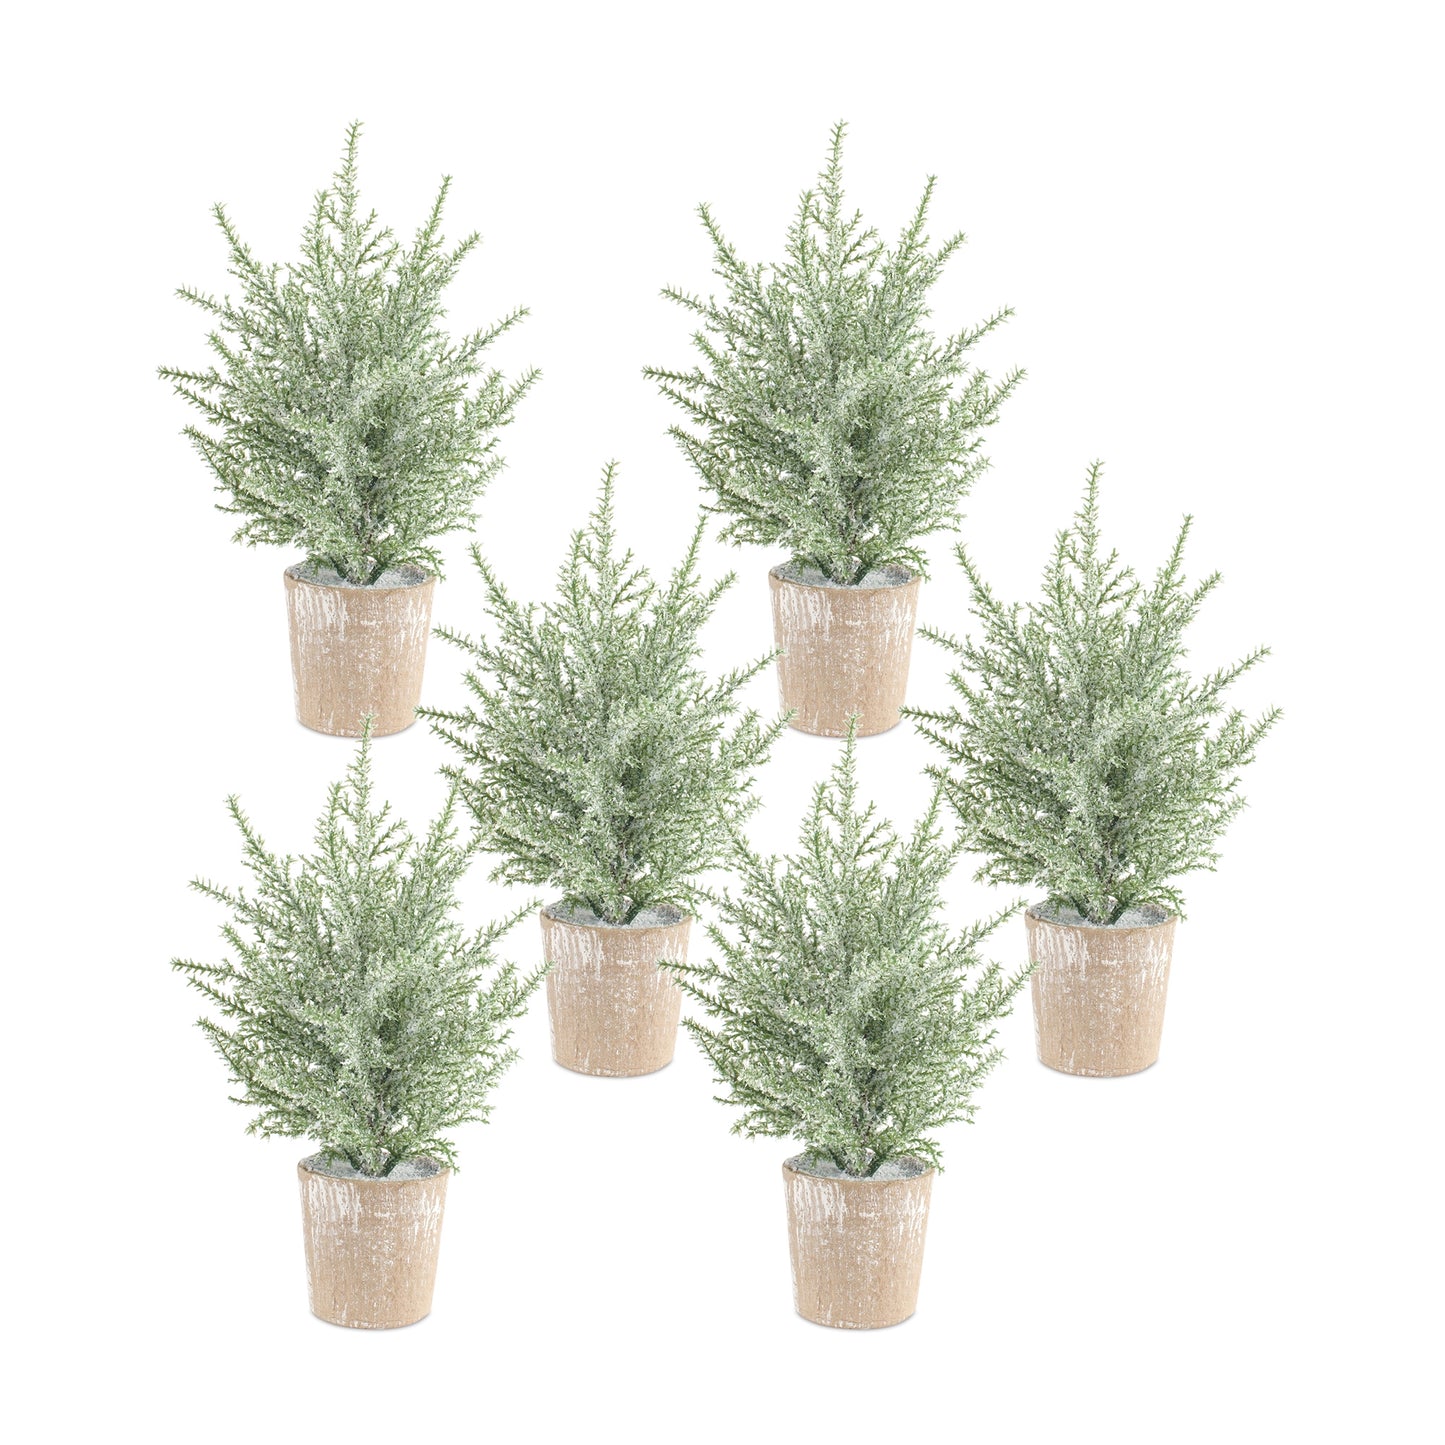 Frosted Holiday Pine Tree in Paper Pot (Set of 6)